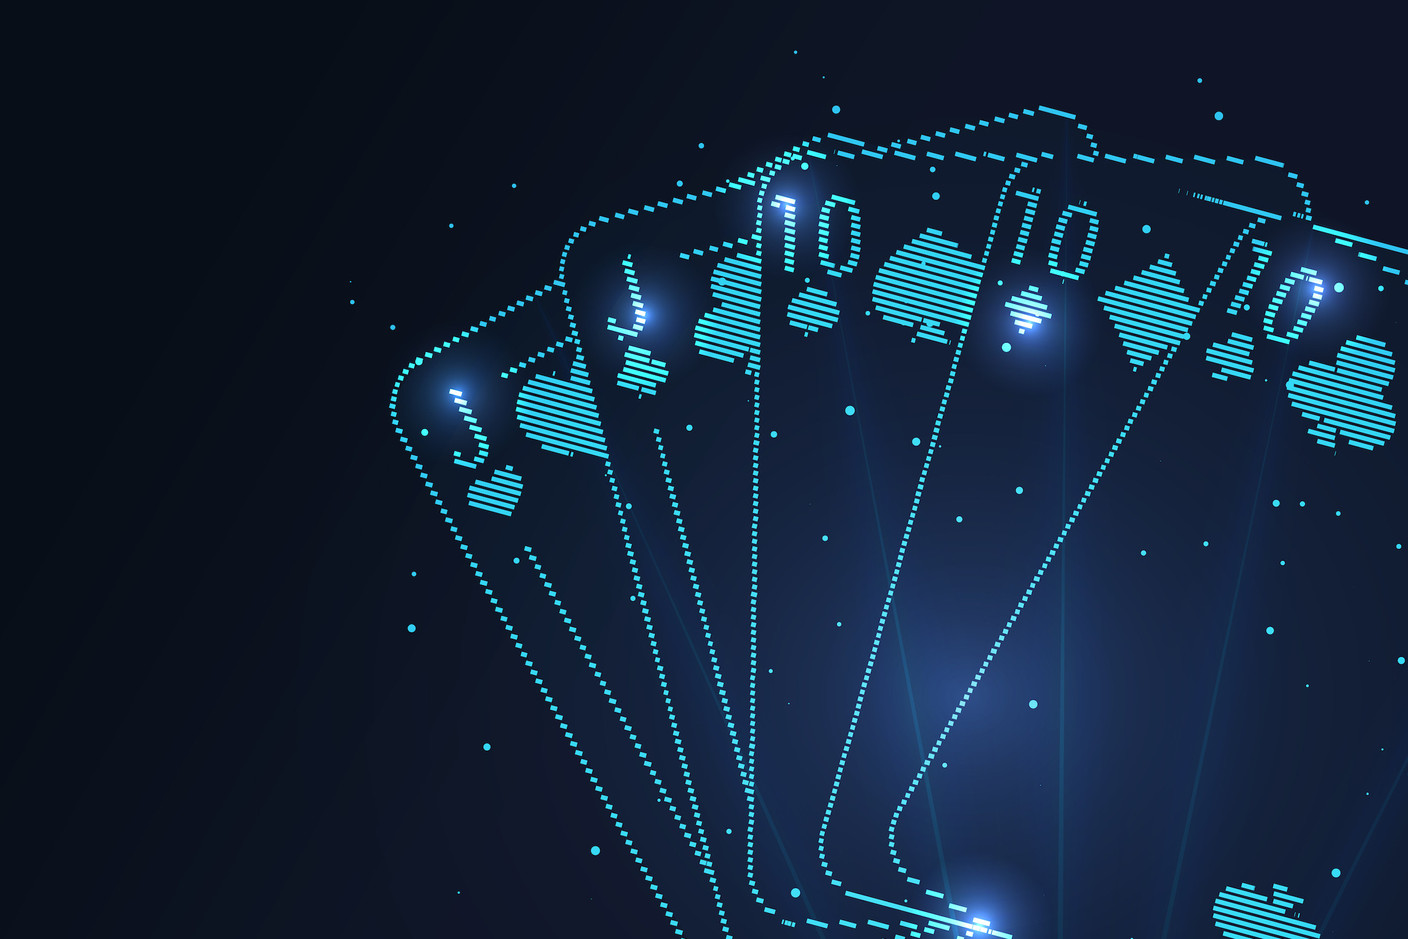 Why “play” cards when you can become a card-playing machine instead? Photo: Shutterstock